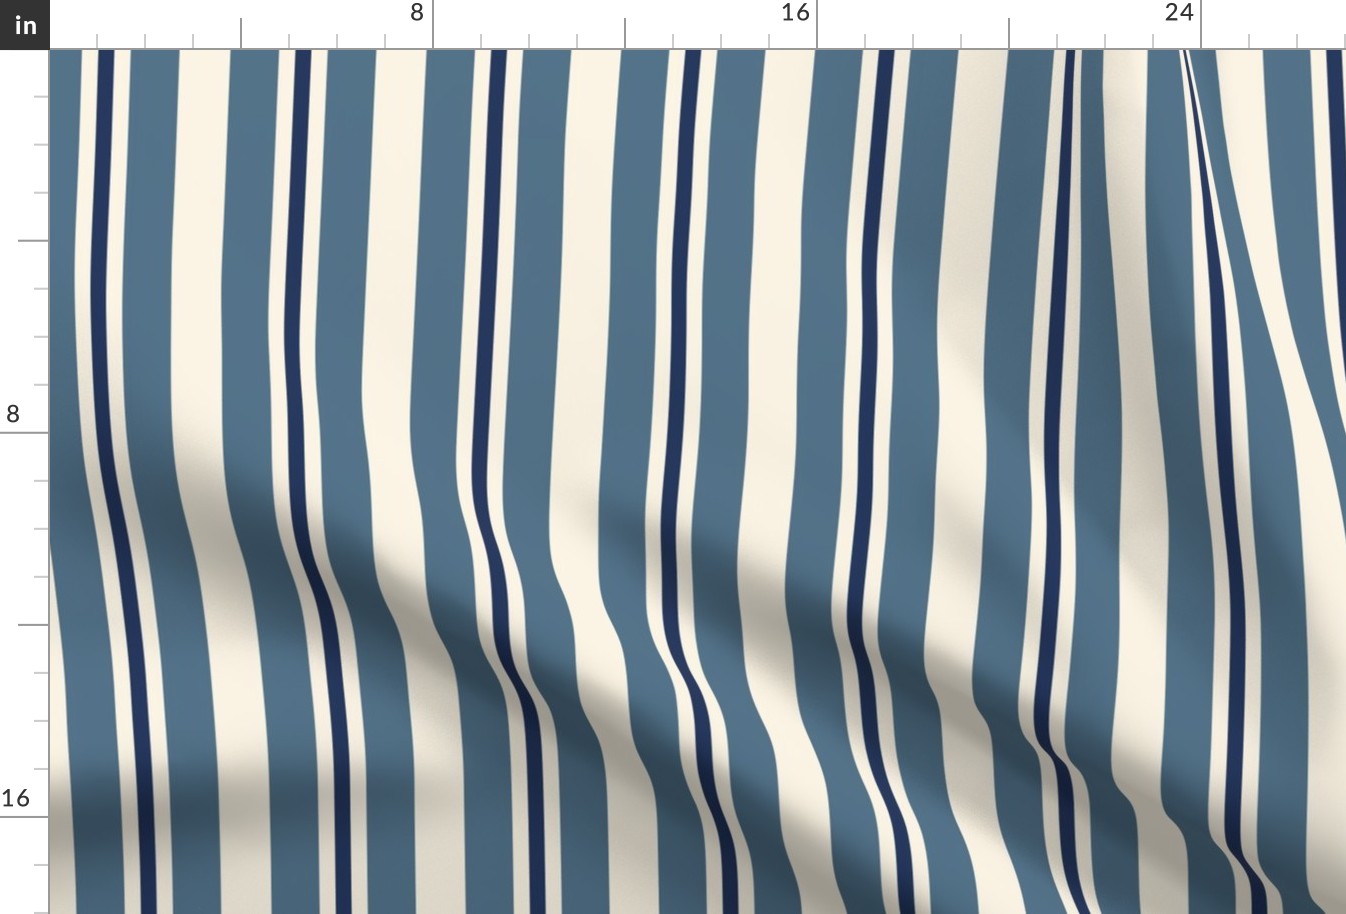 Blue Vertical Stripes - Coastal Chic Collection - Admiral Blue and Classic Navy on Ivory BG